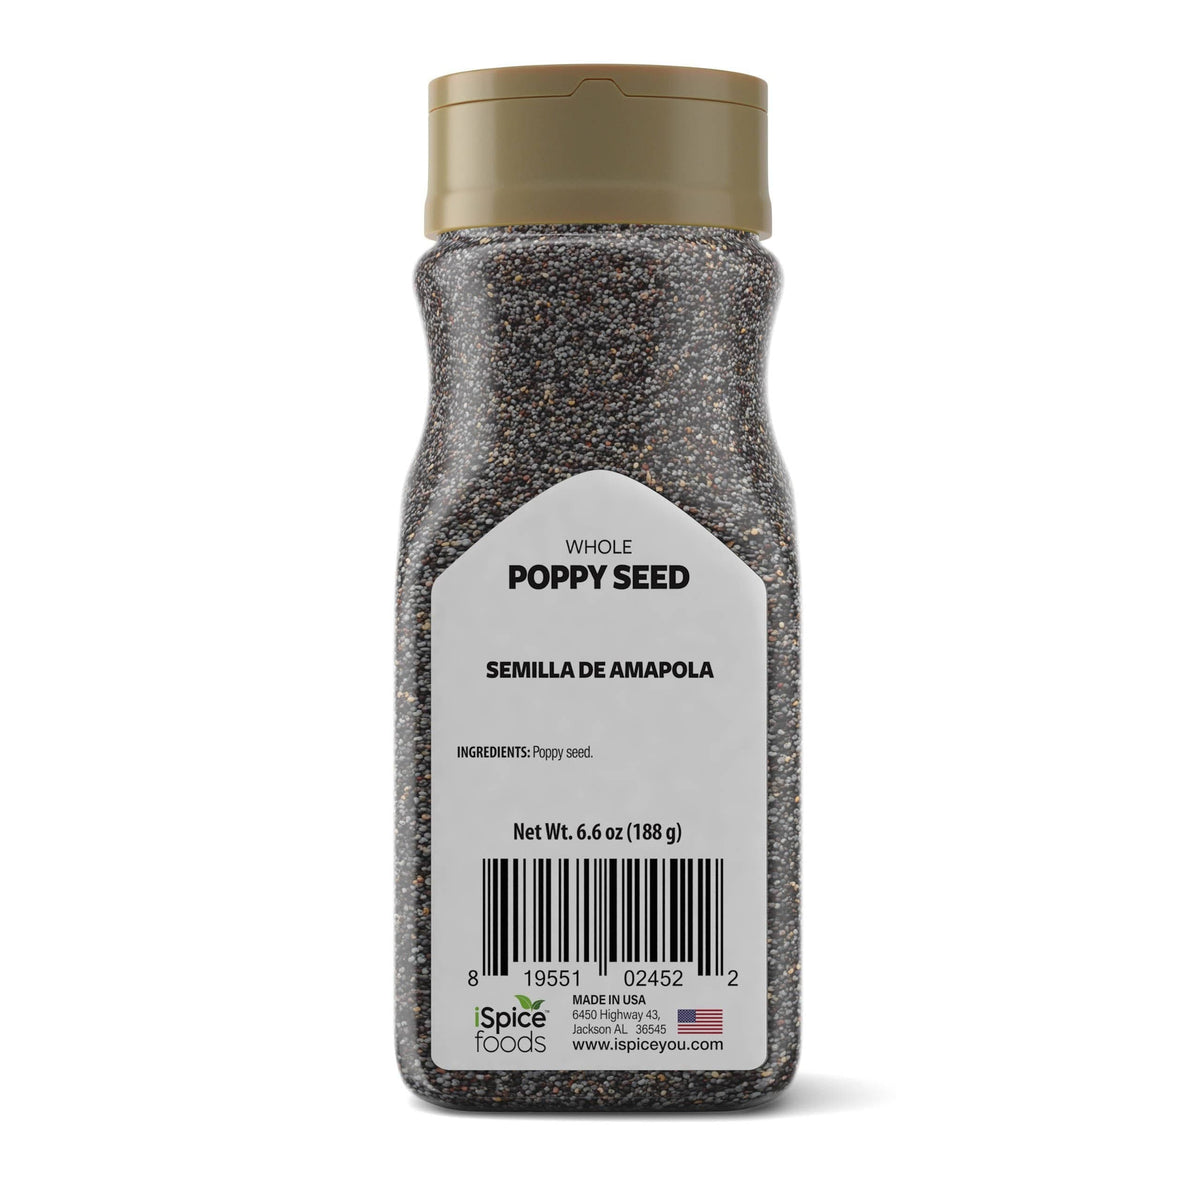 How to Plant, Grow and Harvest Poppy Seeds